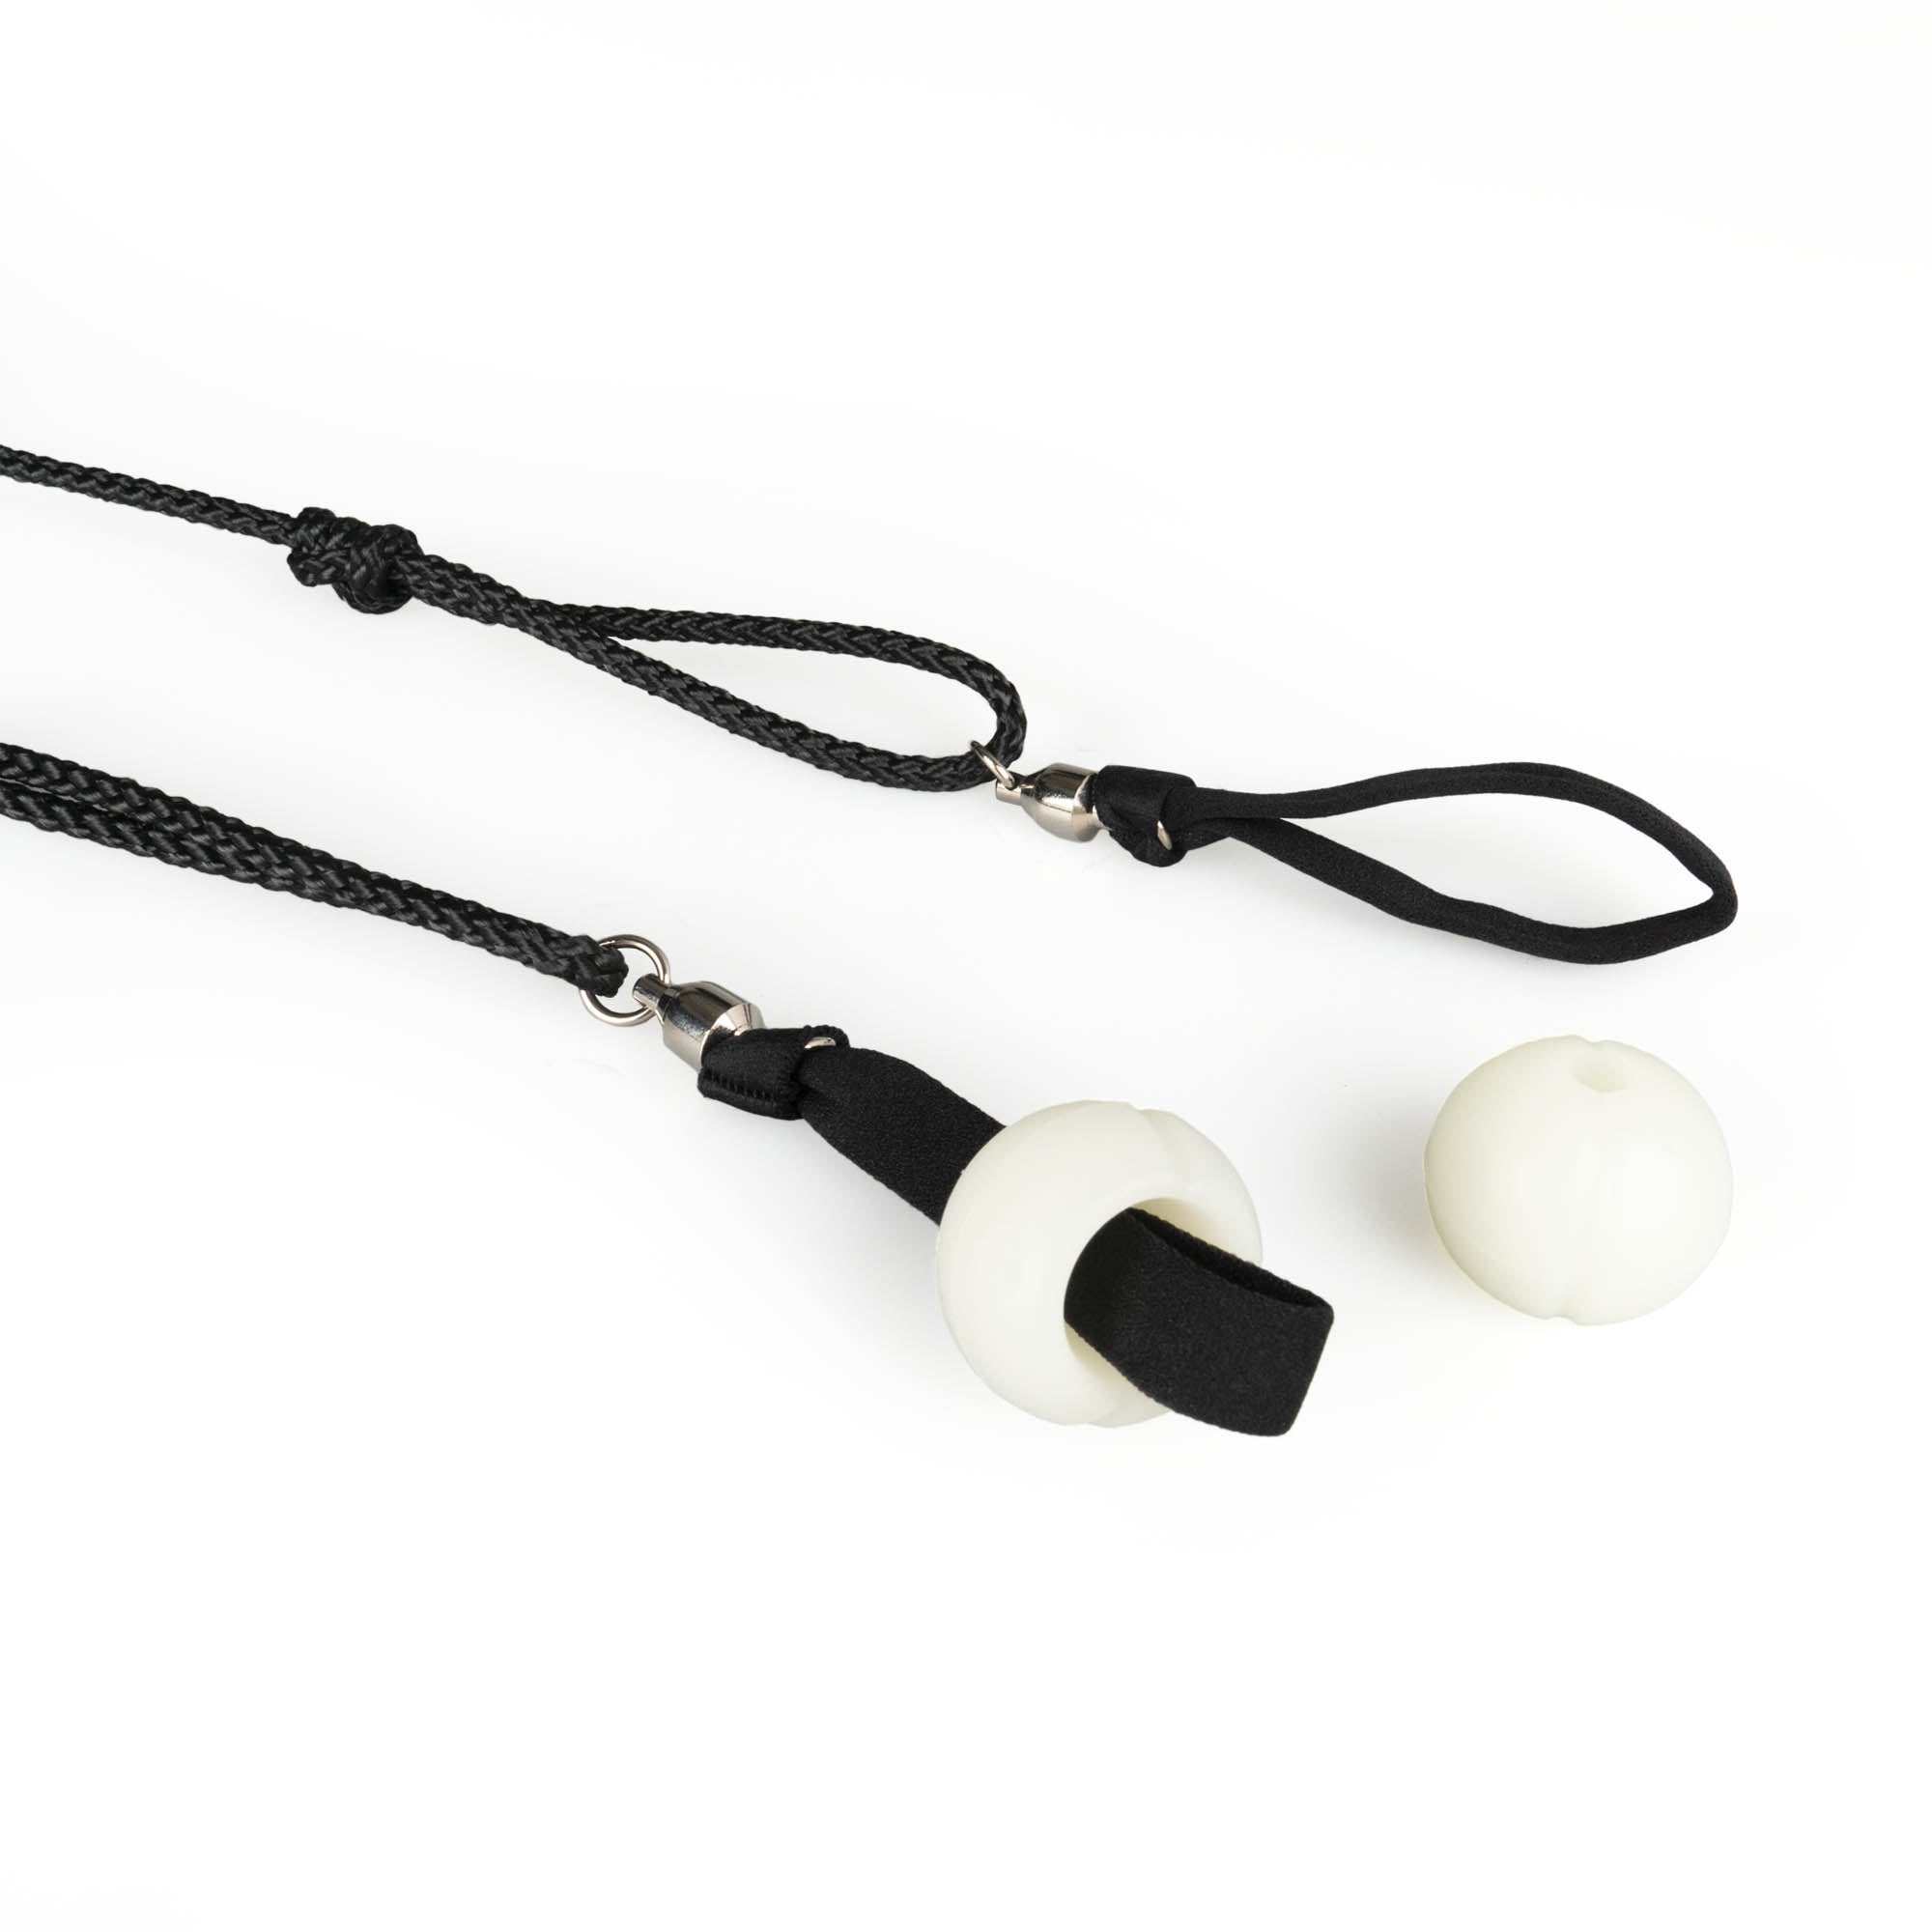 Poi cord ends with handle and one detached poi knob